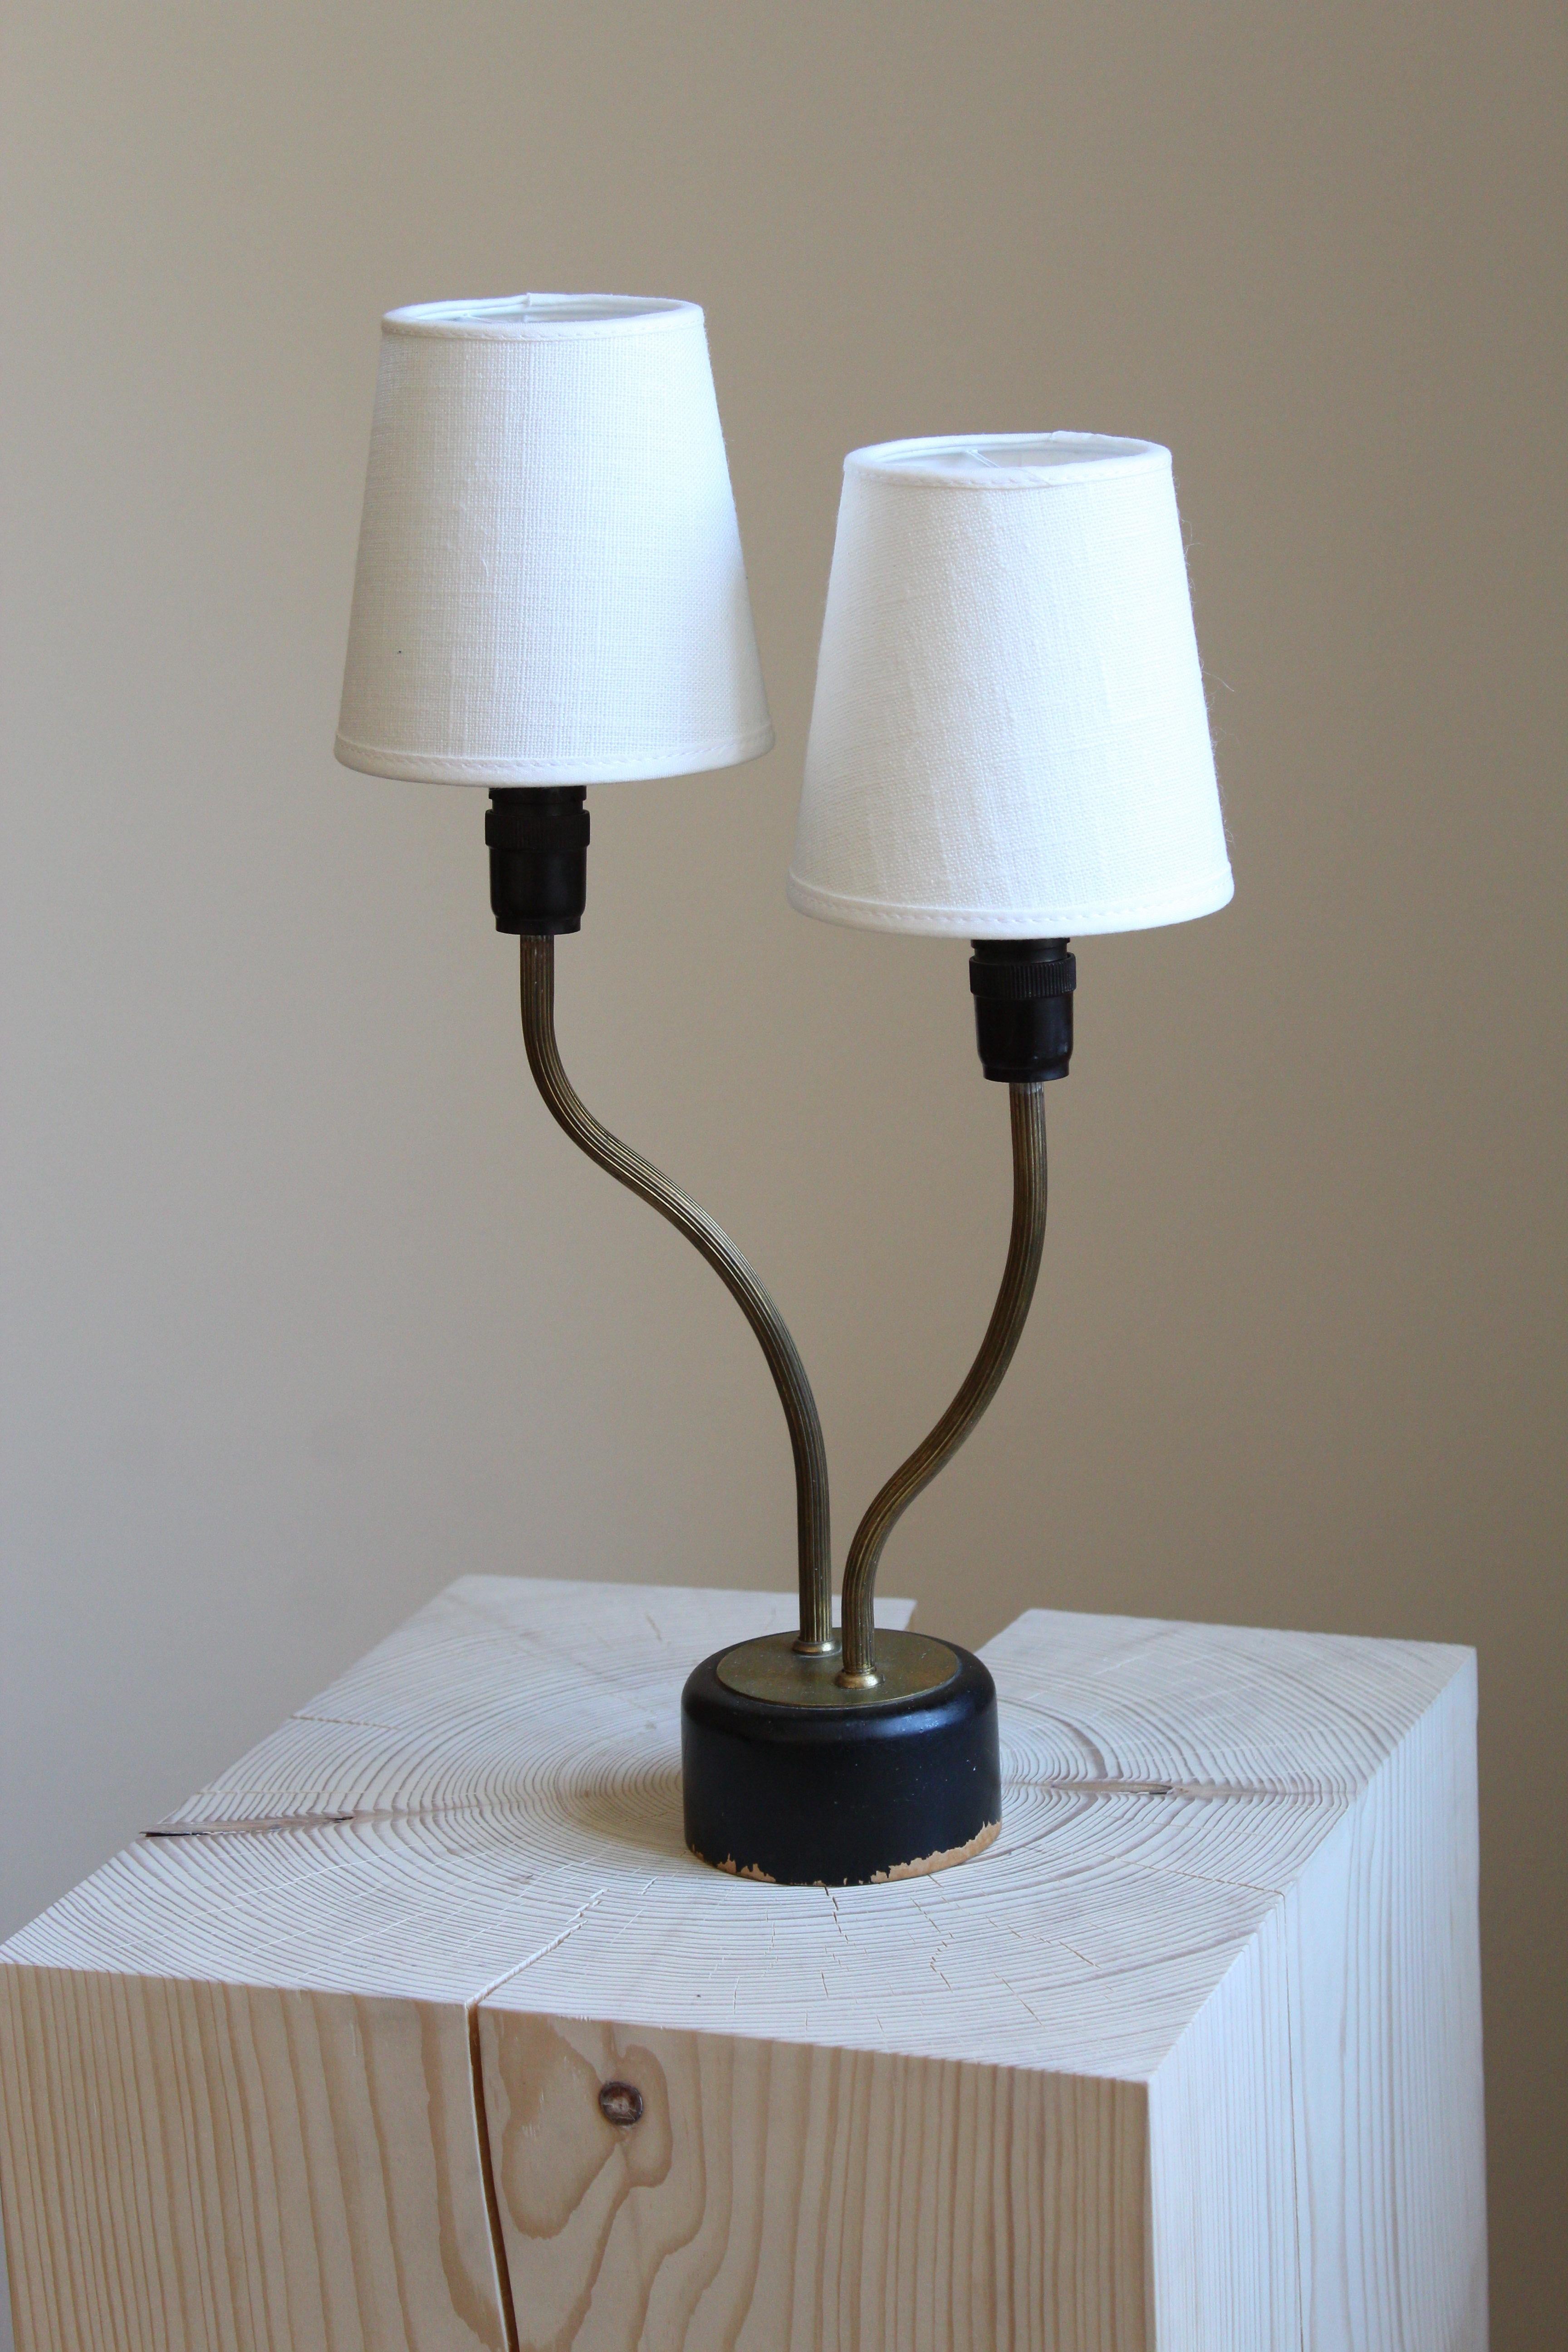 A table lamp. Designed and produced in Sweden, 1950s. Features two organic arms. Brand new linen lampshades.

Other designers of the period include Josef Frank, Hans Bergström, Paavo Tynell, Alvar Aalto, and Kaare Klint.